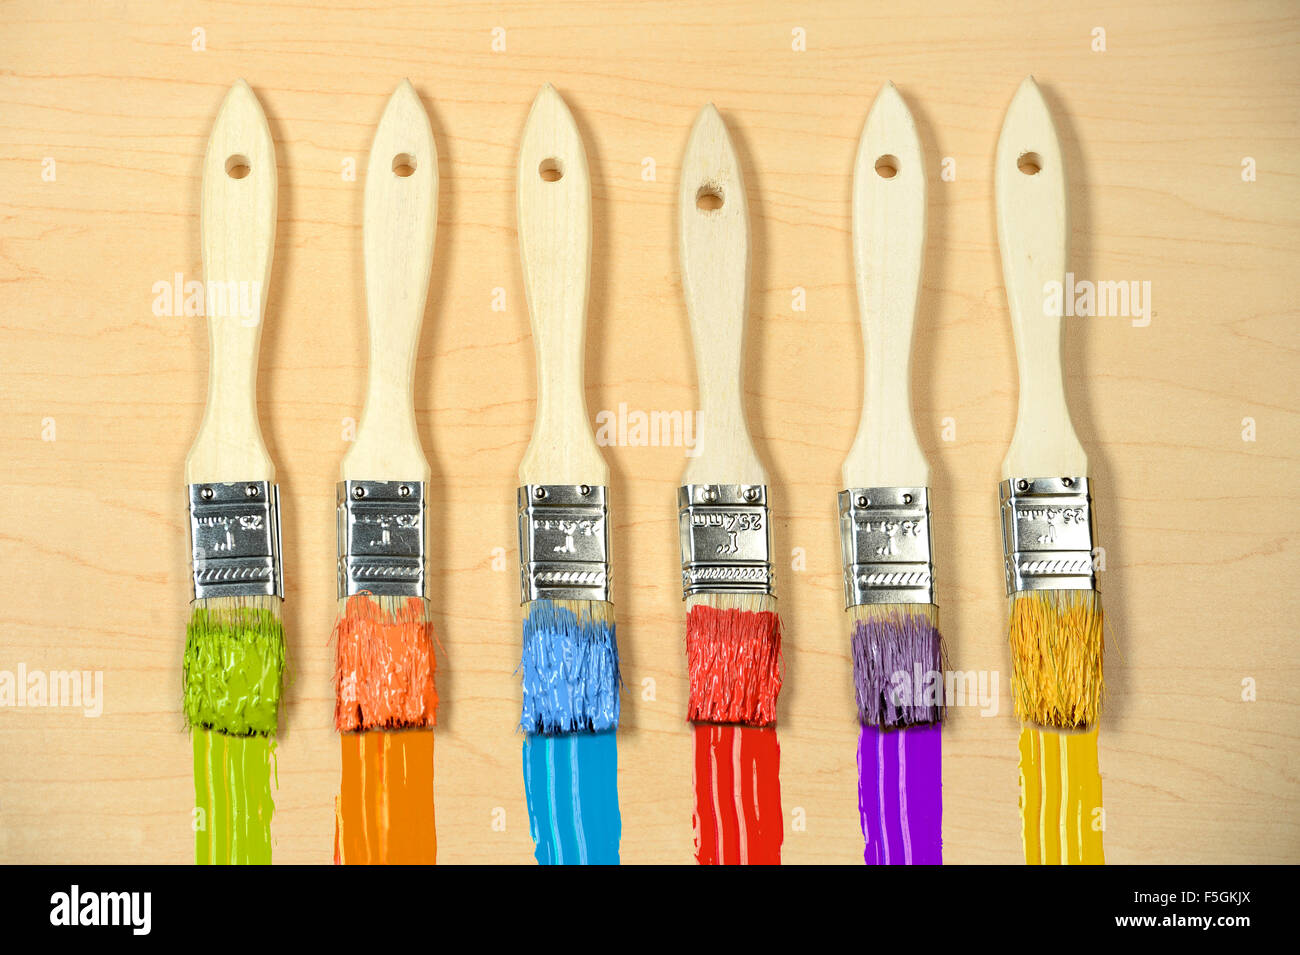 Six paintbrushes with paint of different colors over wood Stock Photo